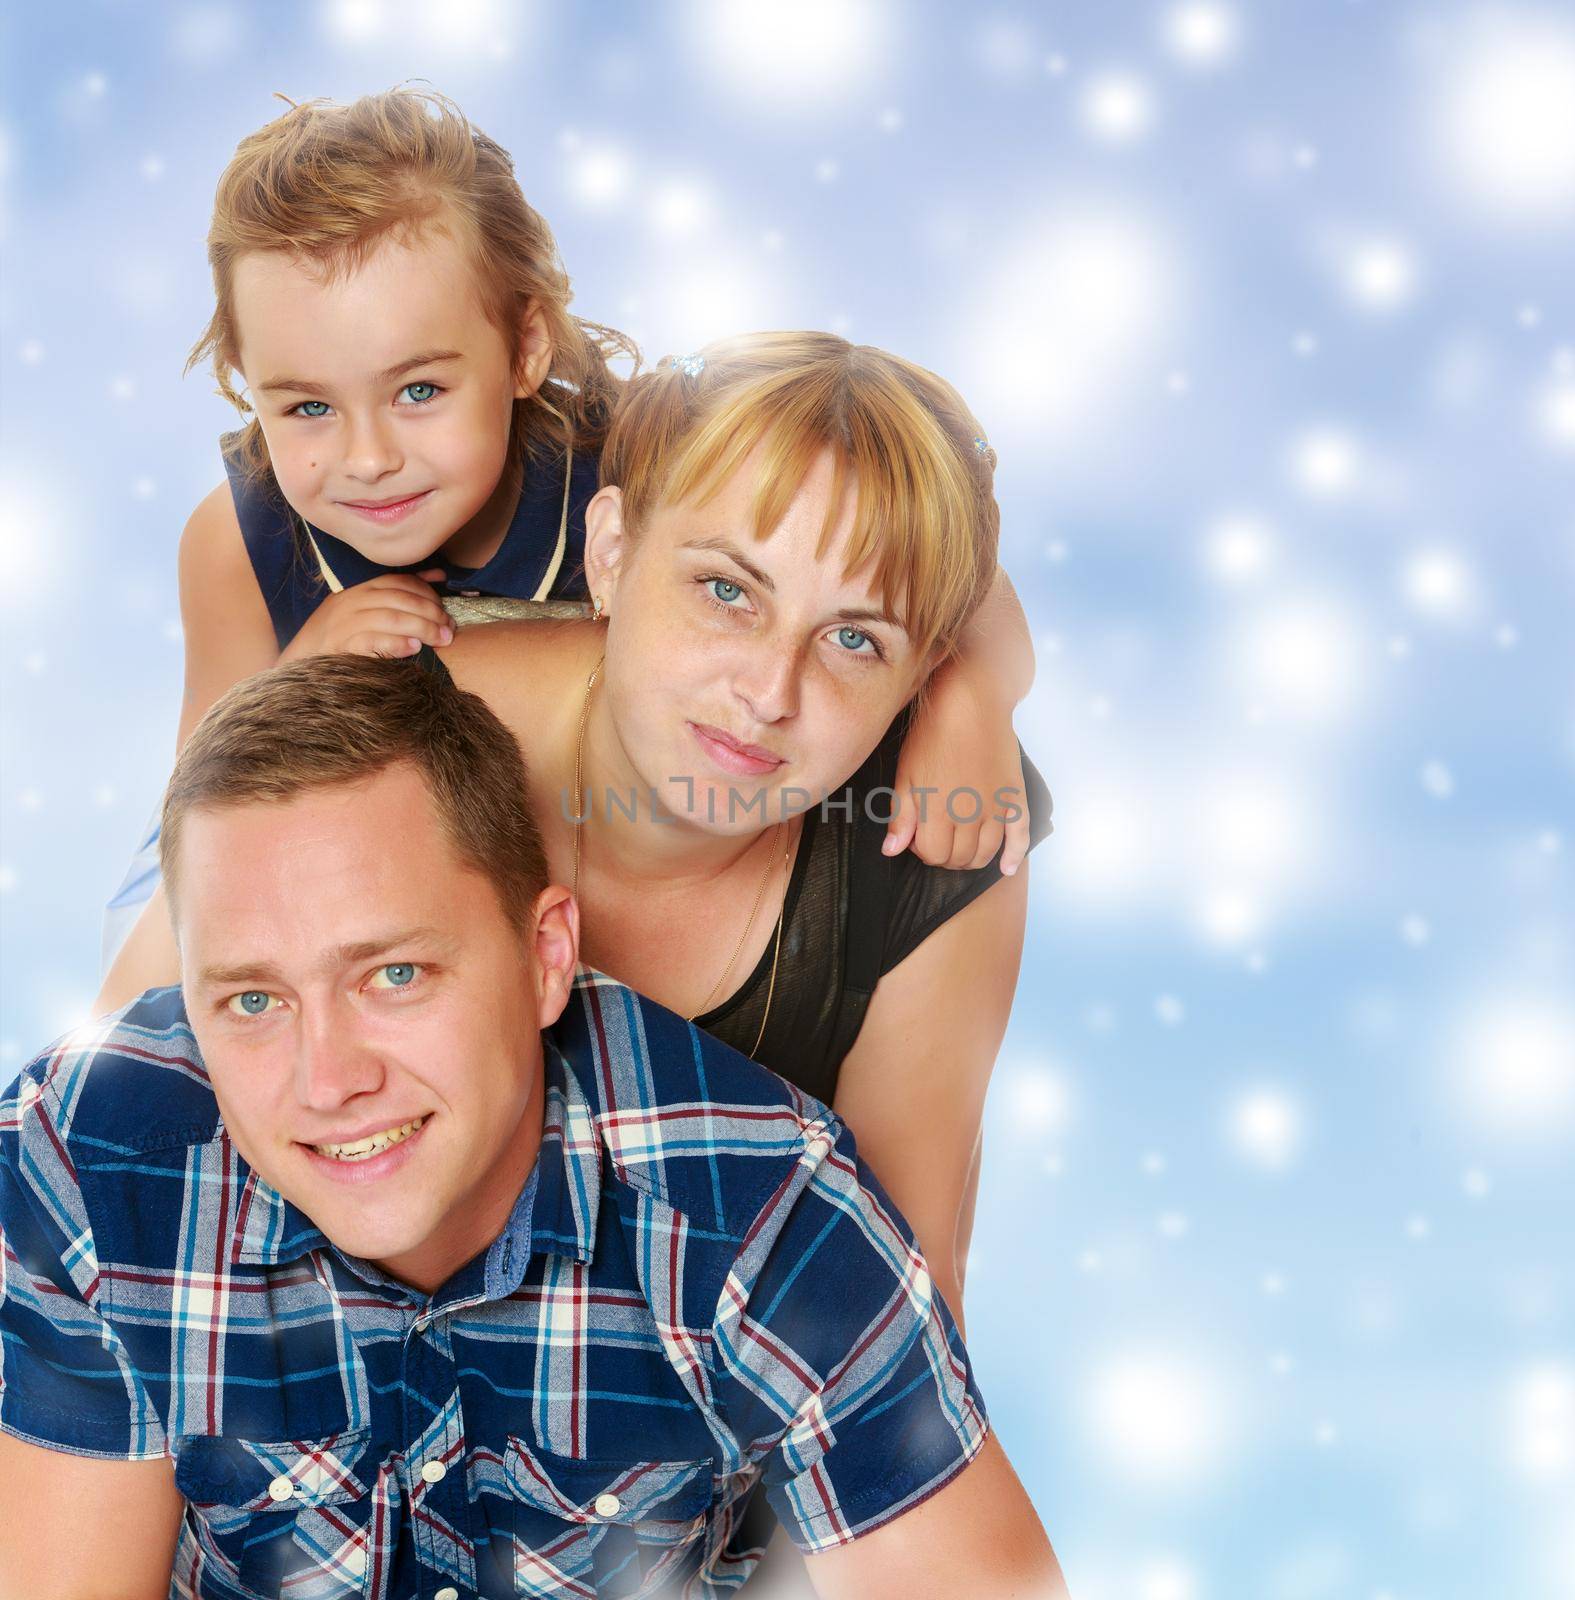 Cheerful young family of three. Mother and daughter lying on dad's back.Blue Christmas festive background with white snowflakes.